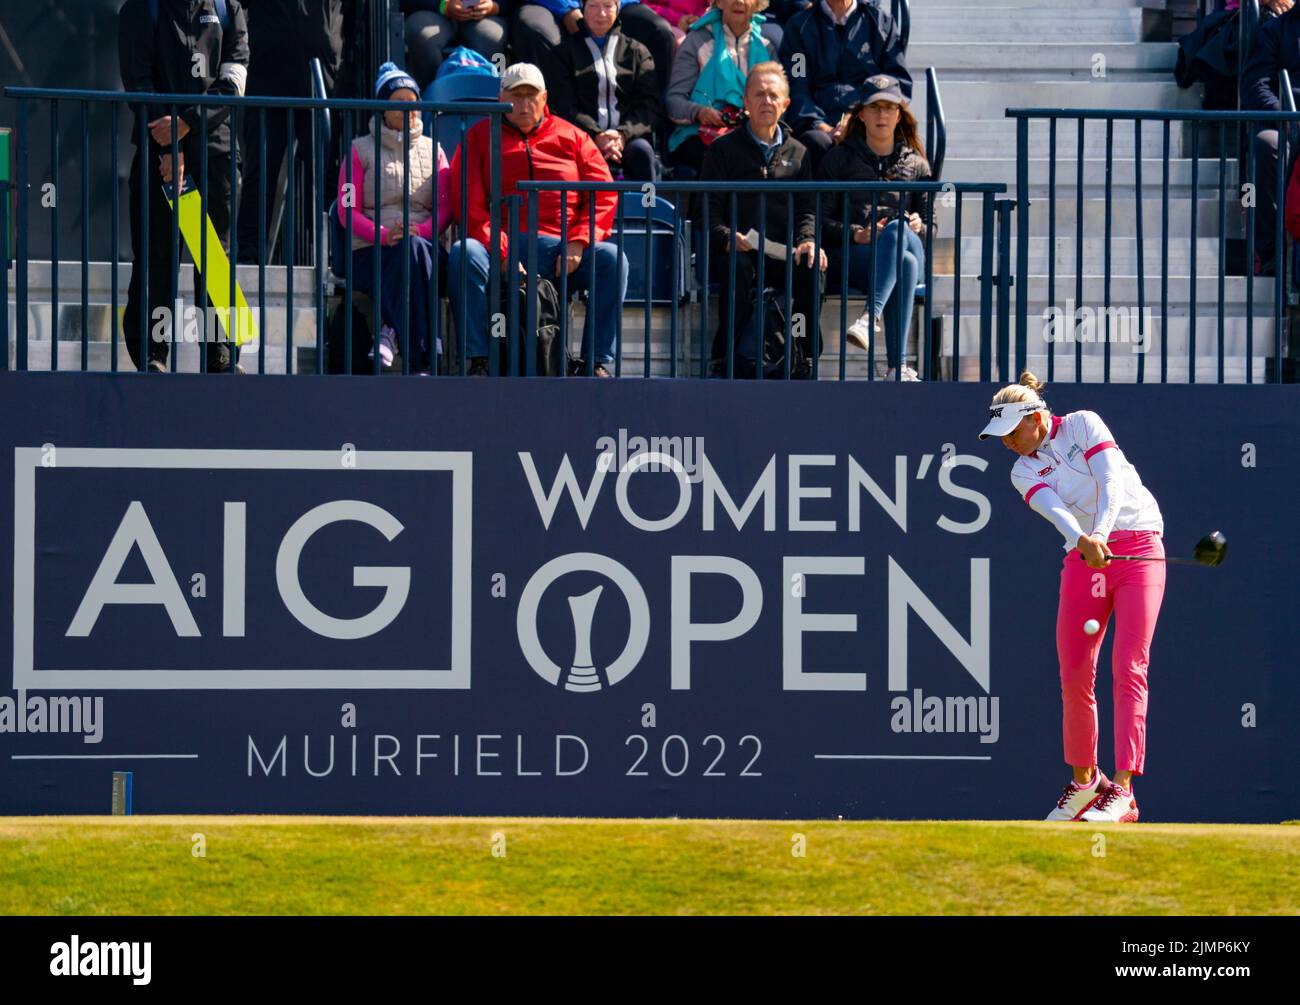 Gullane, Scotland, UK. 7th August 2022. Final  round of the AIG Women’s Open golf championship at Muirfield in East Lothian. Pic;  Ryann O’ Toole tees off at the first hole. Iain Masterton/Alamy Live News Stock Photo